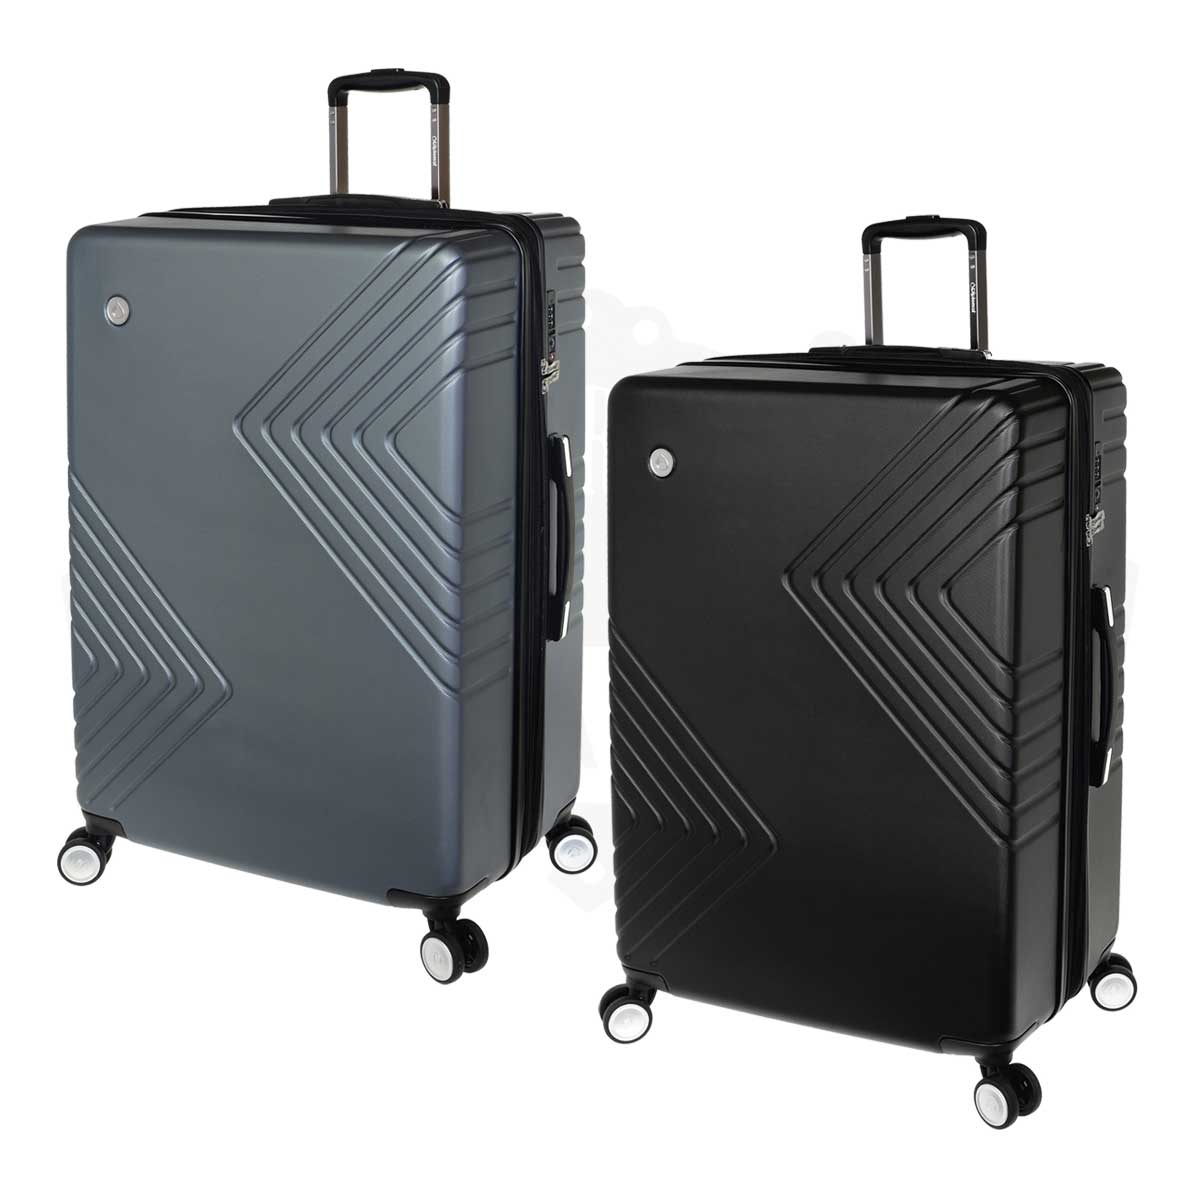 Suitcase TD21113 The Arrow2 Collection - Diplomat